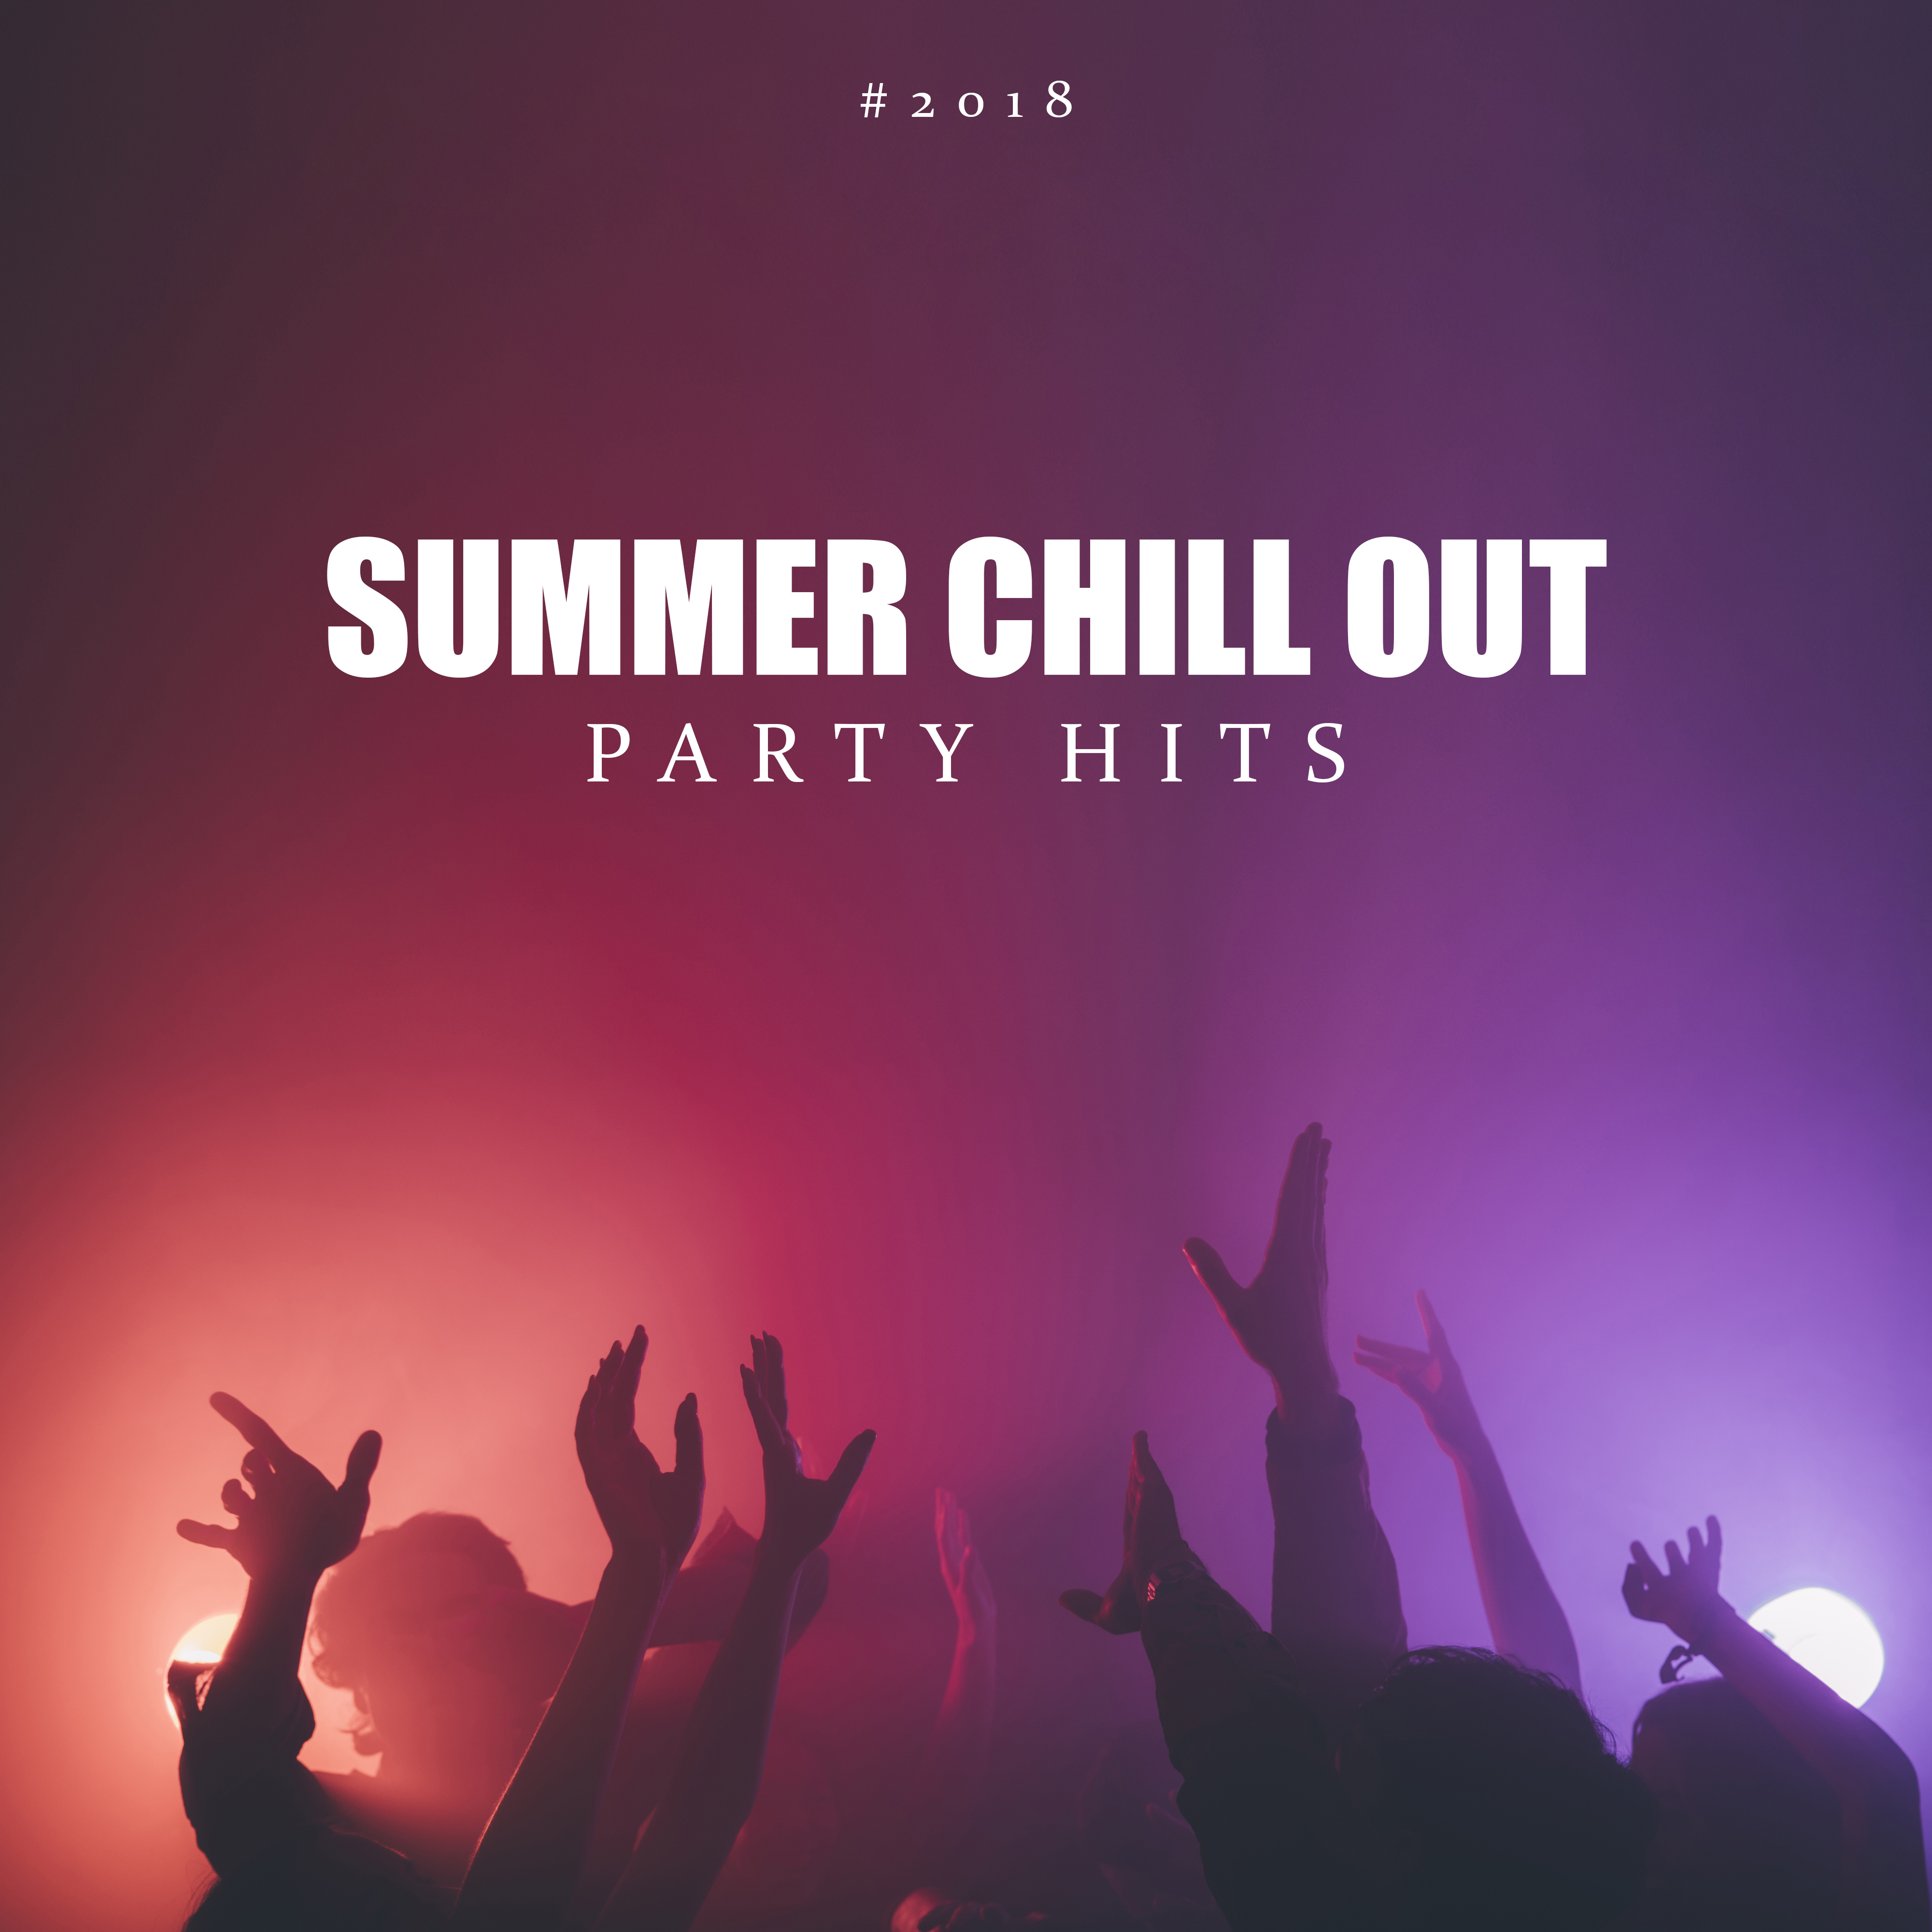 #2018 Summer Chill Out Party Hits